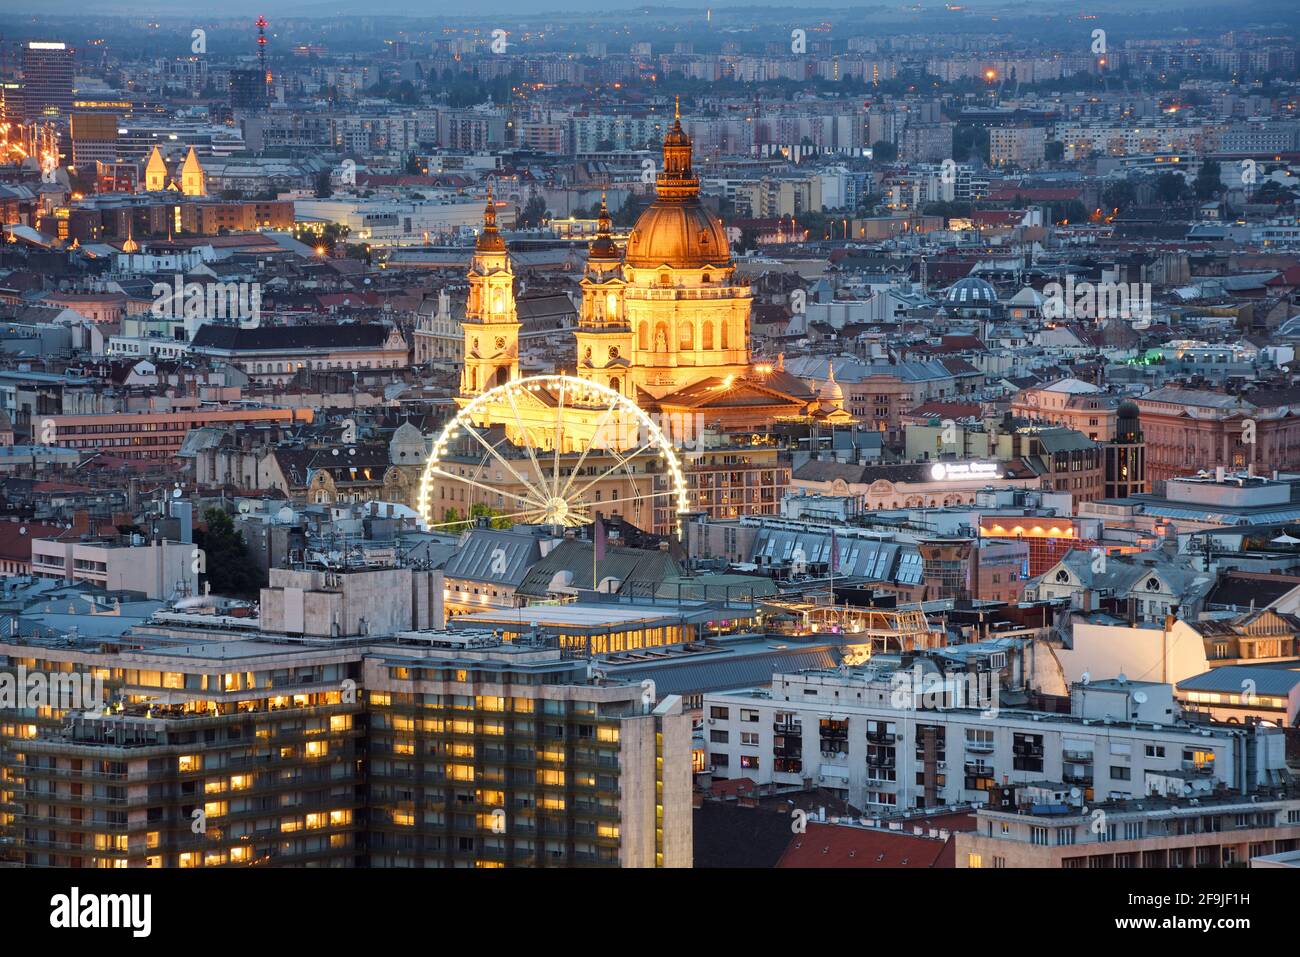 Budapest city center, Hungary, with St. Stephen's Basilica illuminated at late evening hour Stock Photo